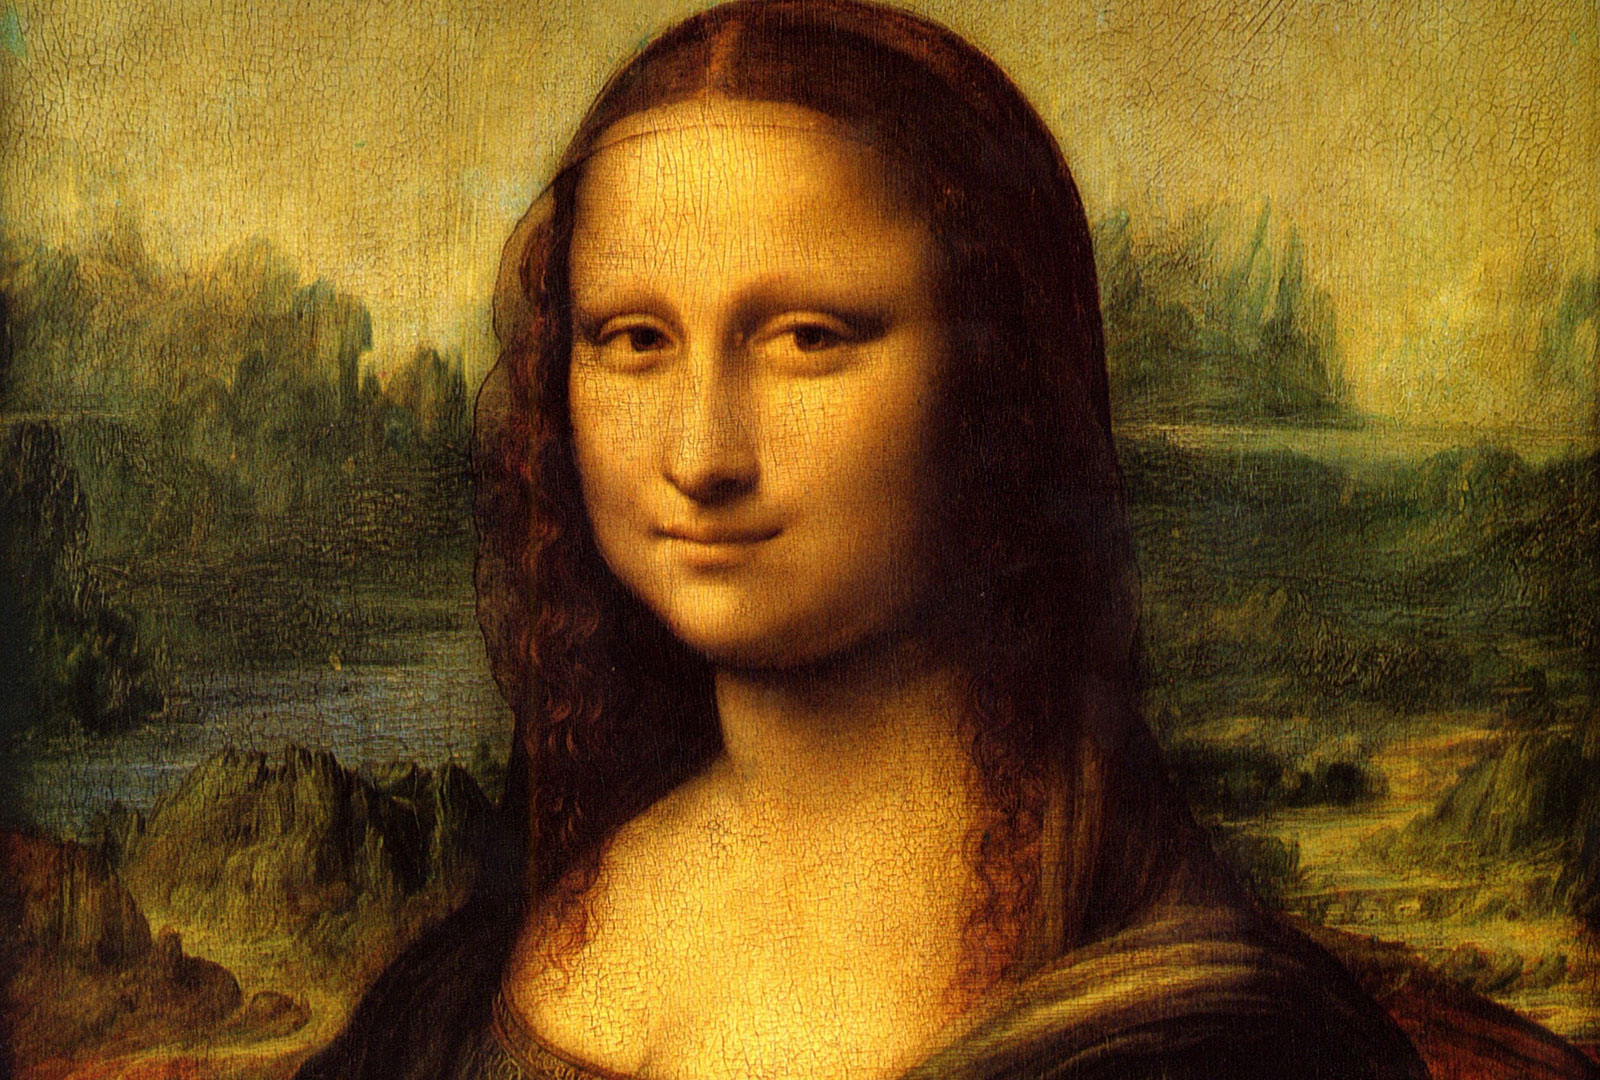 If You Can Pass This General Knowledge Test, You Must Have a Superior IQ Score Mona Lisa Painting By Leonardo Da Vinci